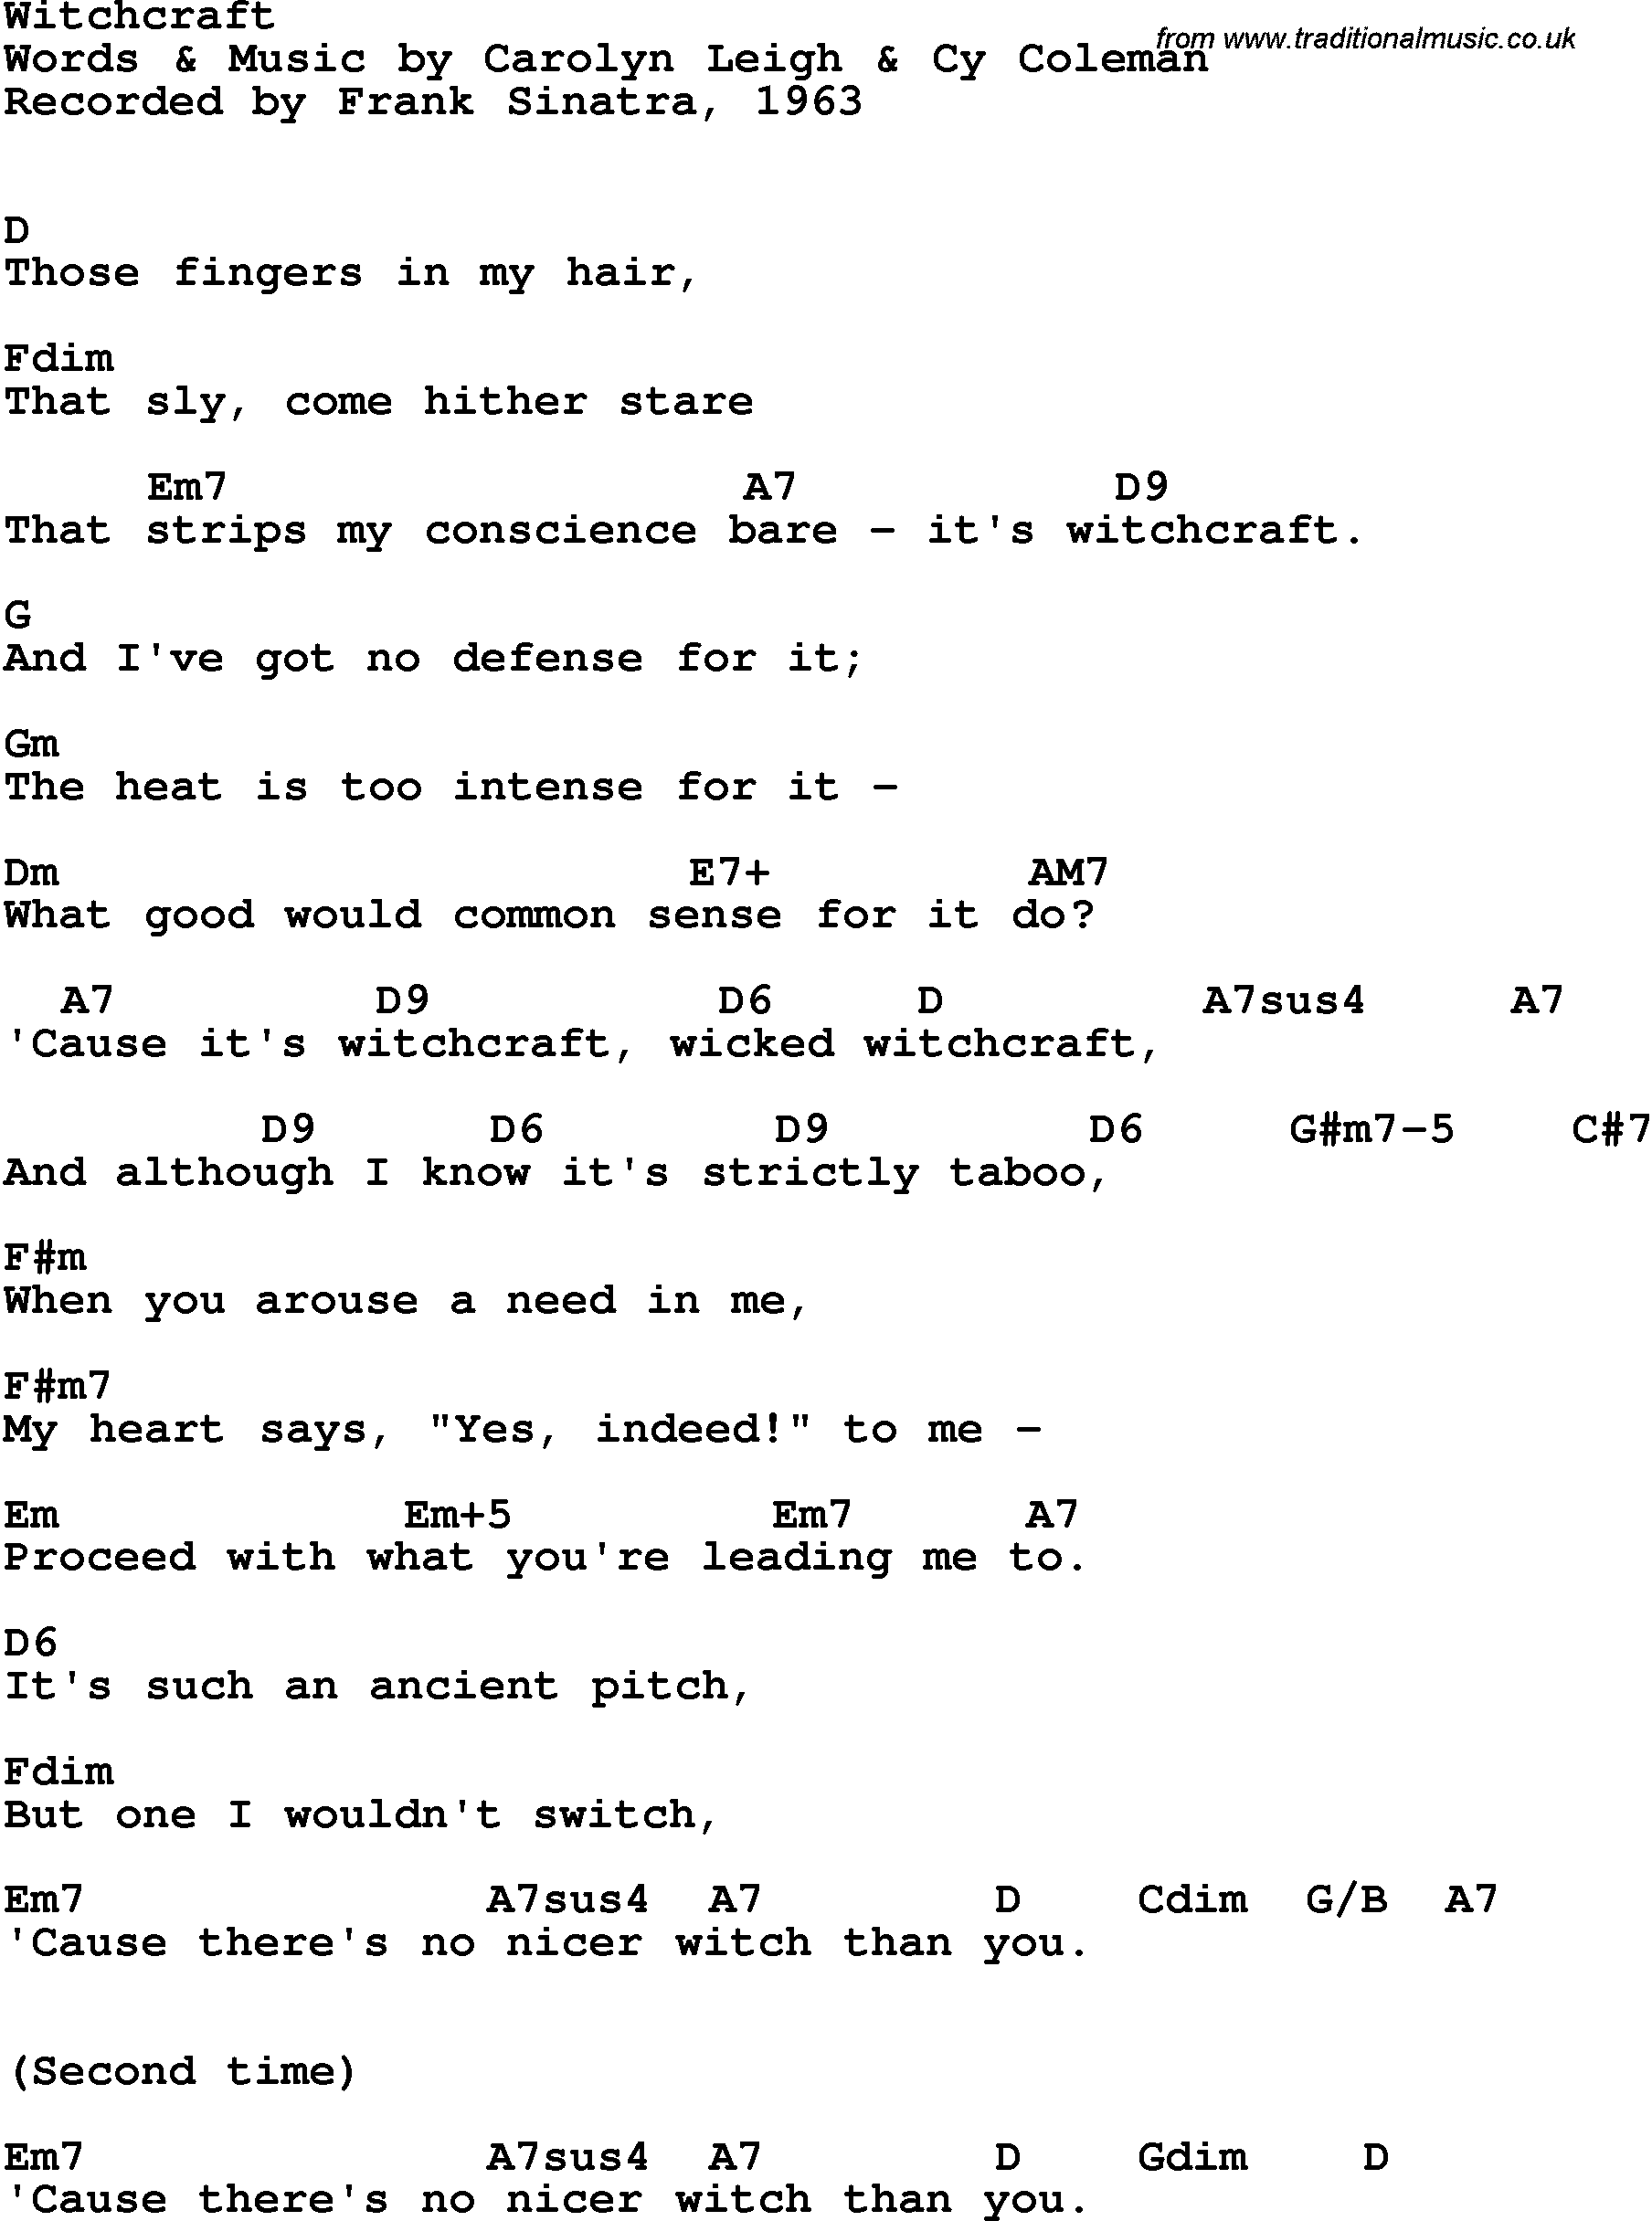 Song Lyrics with guitar chords for Witchcraft - Frank Sinatra, 1963